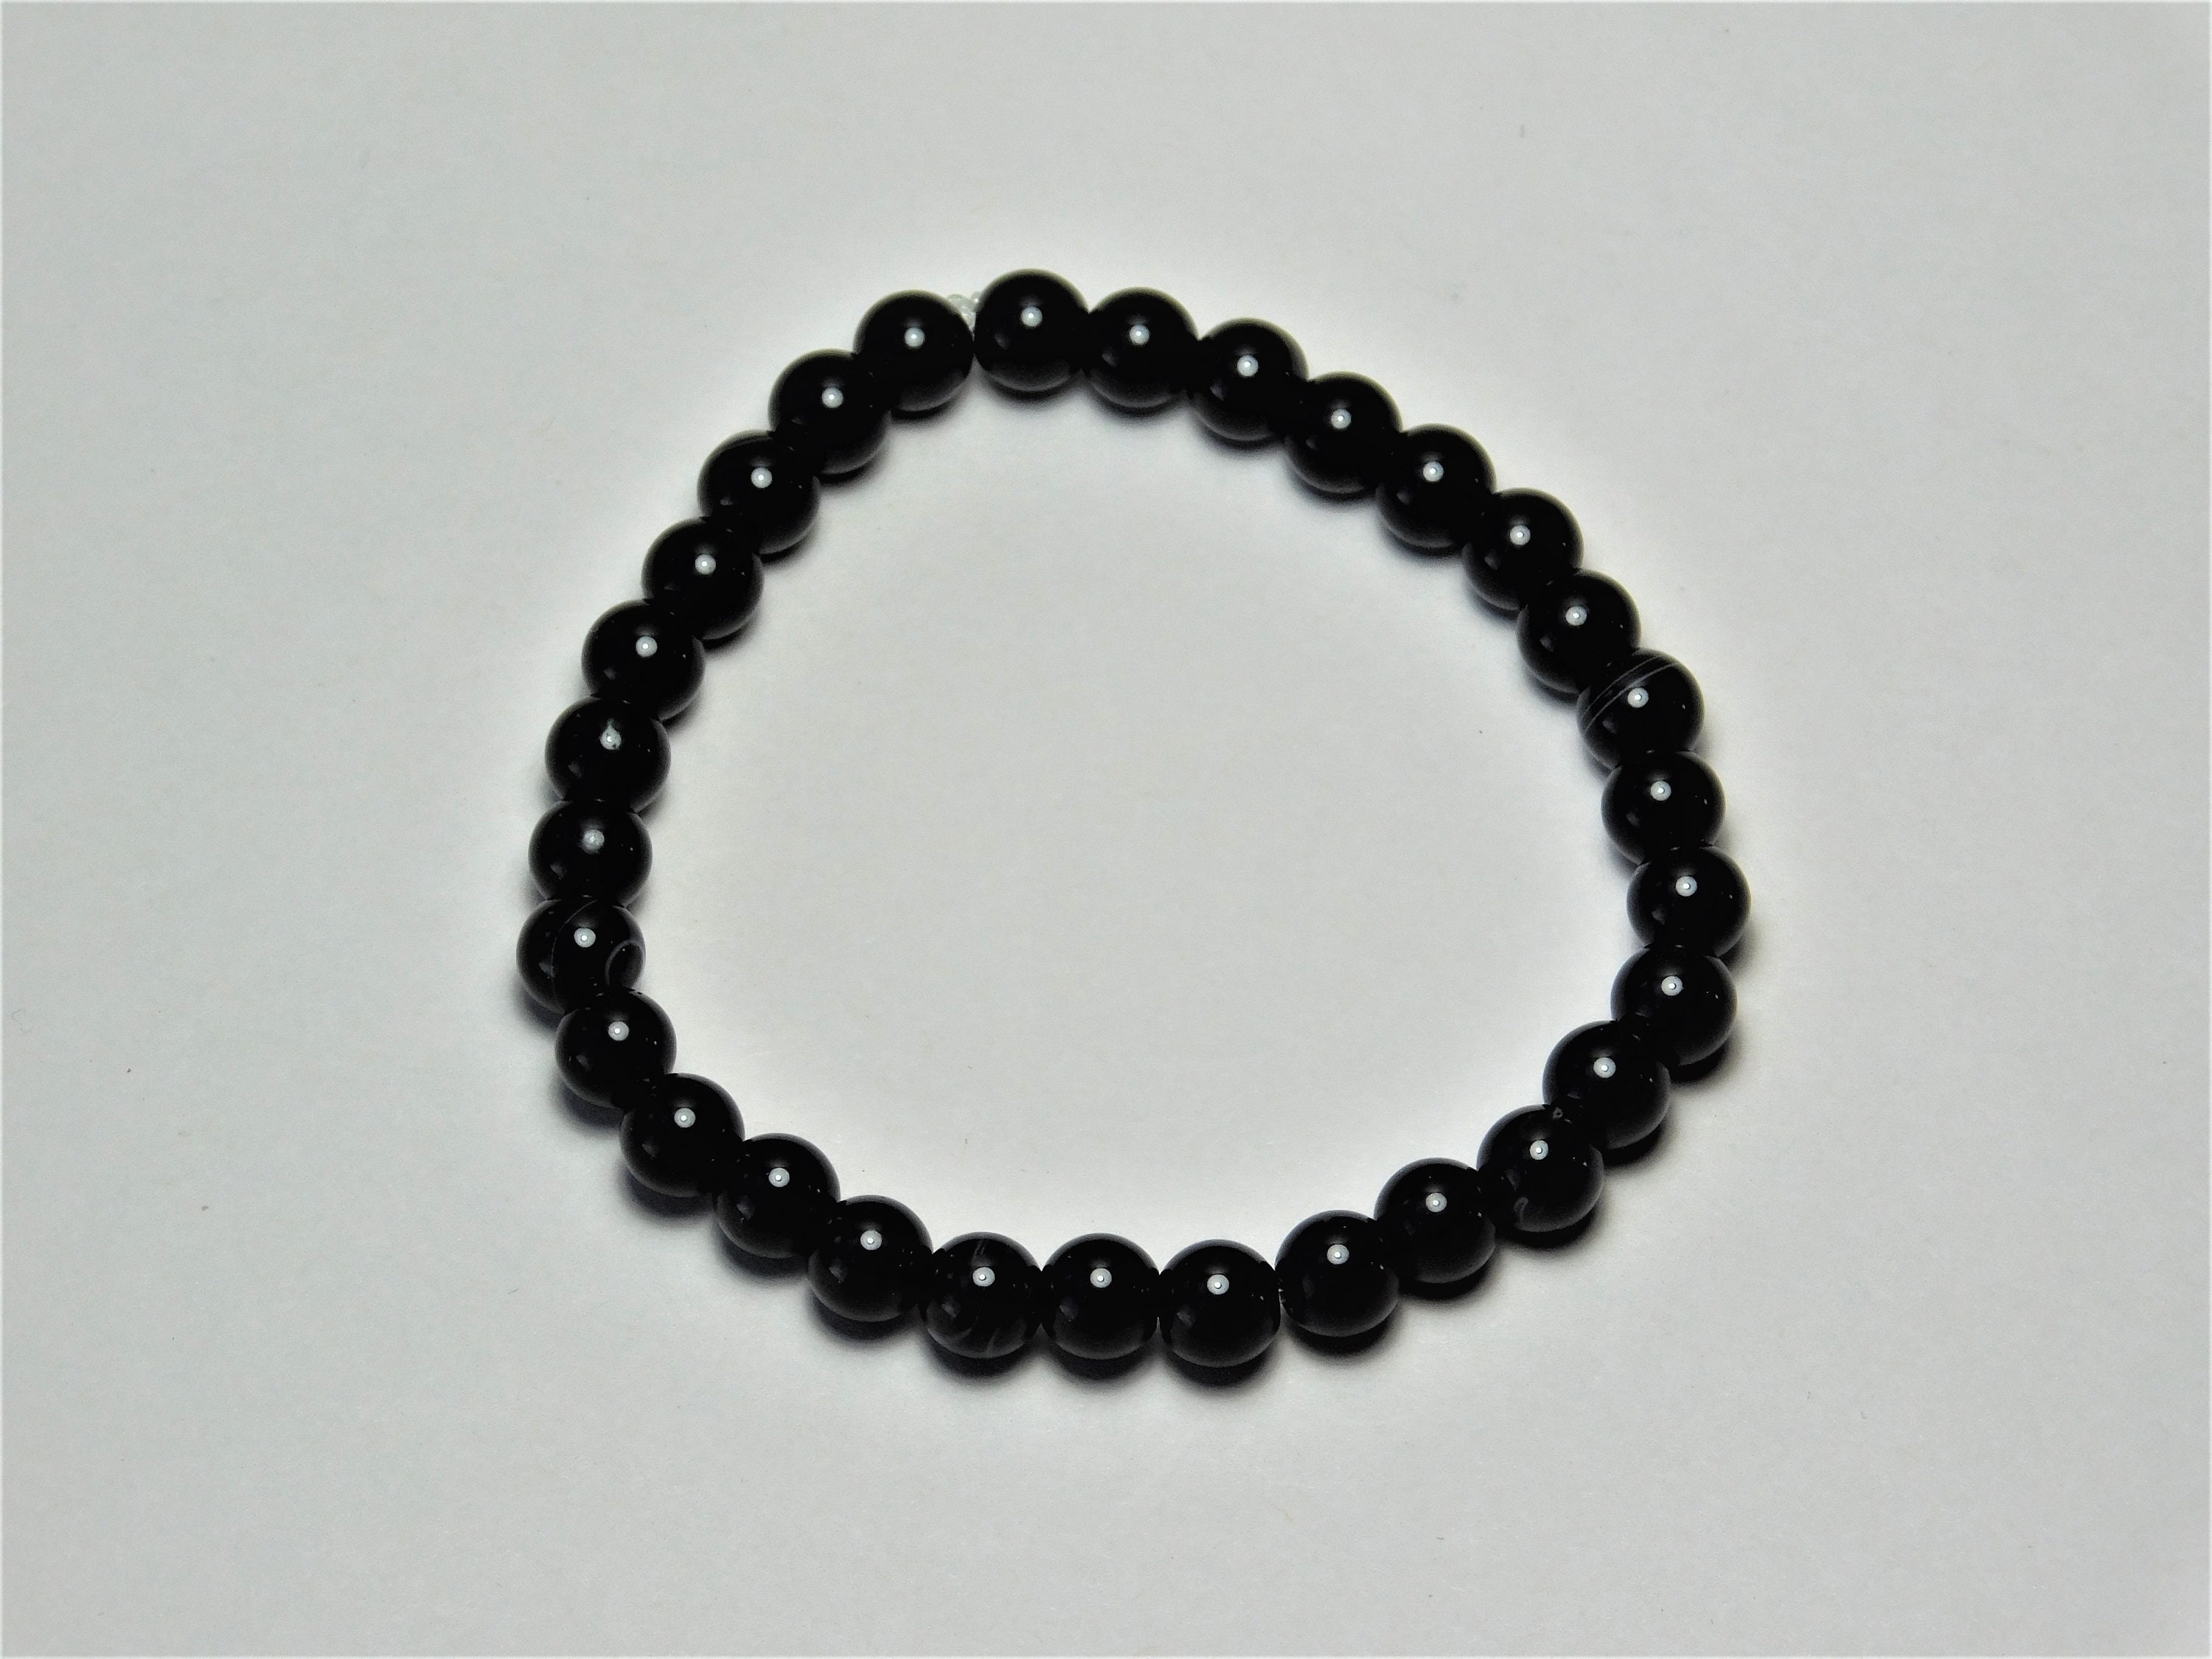 7 black onyx how to use